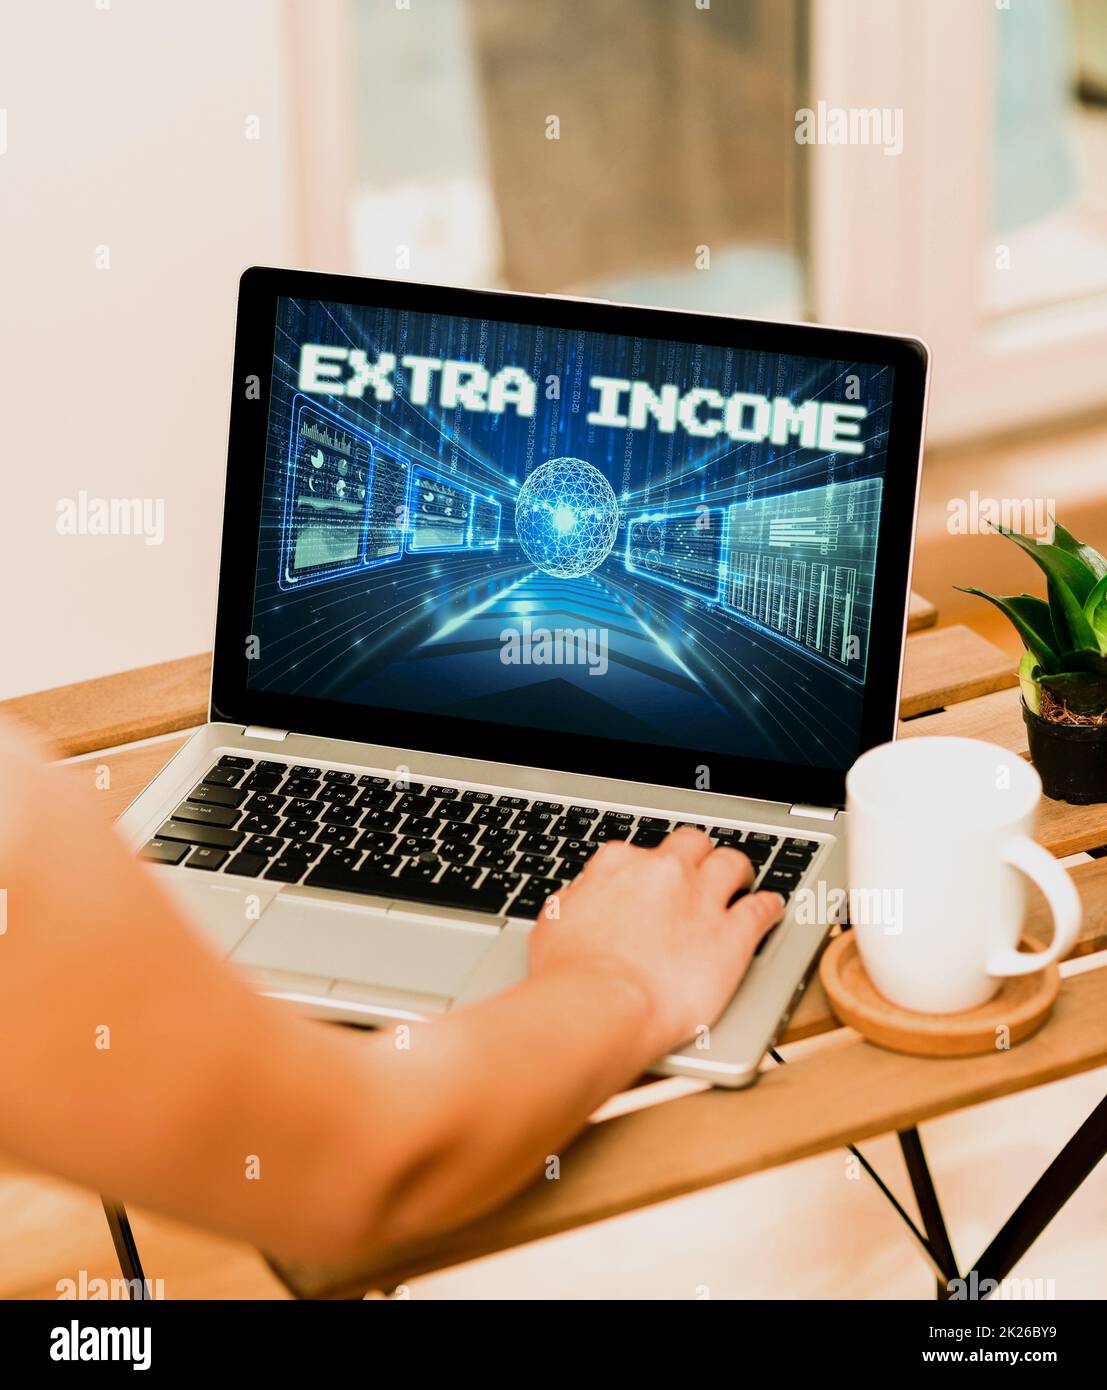 Sign displaying Extra Income. Business idea Additional fund received or earned from a non regular basis Hand Busy Typing On Laptop Beside Coffe Mug And Plant Working From Home. Stock Photo